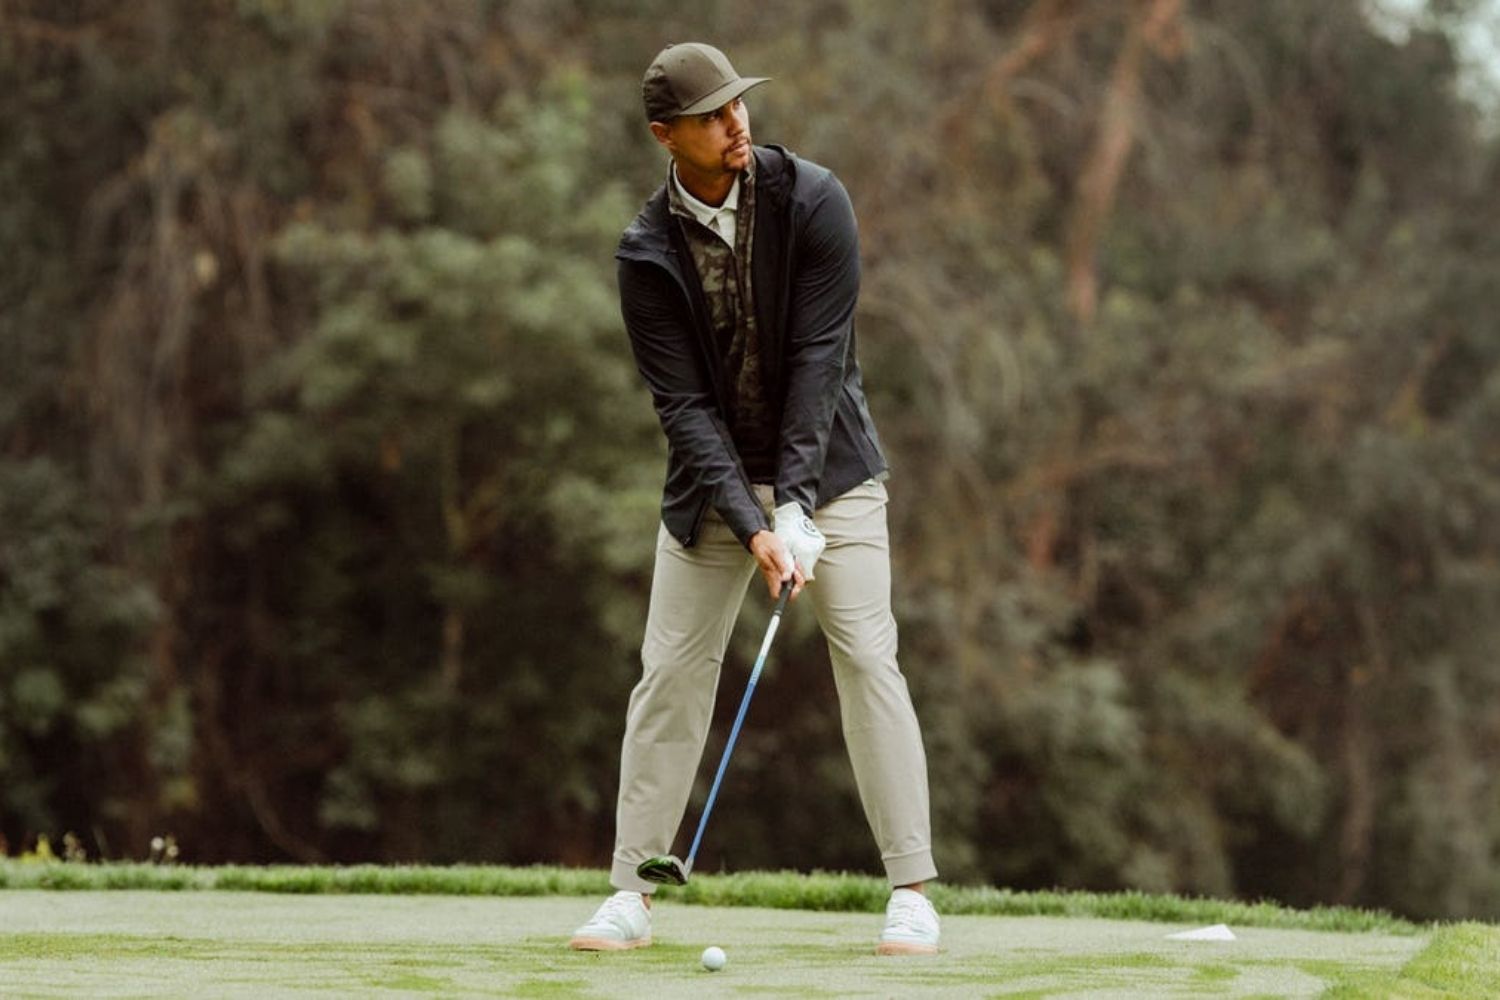 What to Wear Golfing for Men? 25 Outfit Ideas